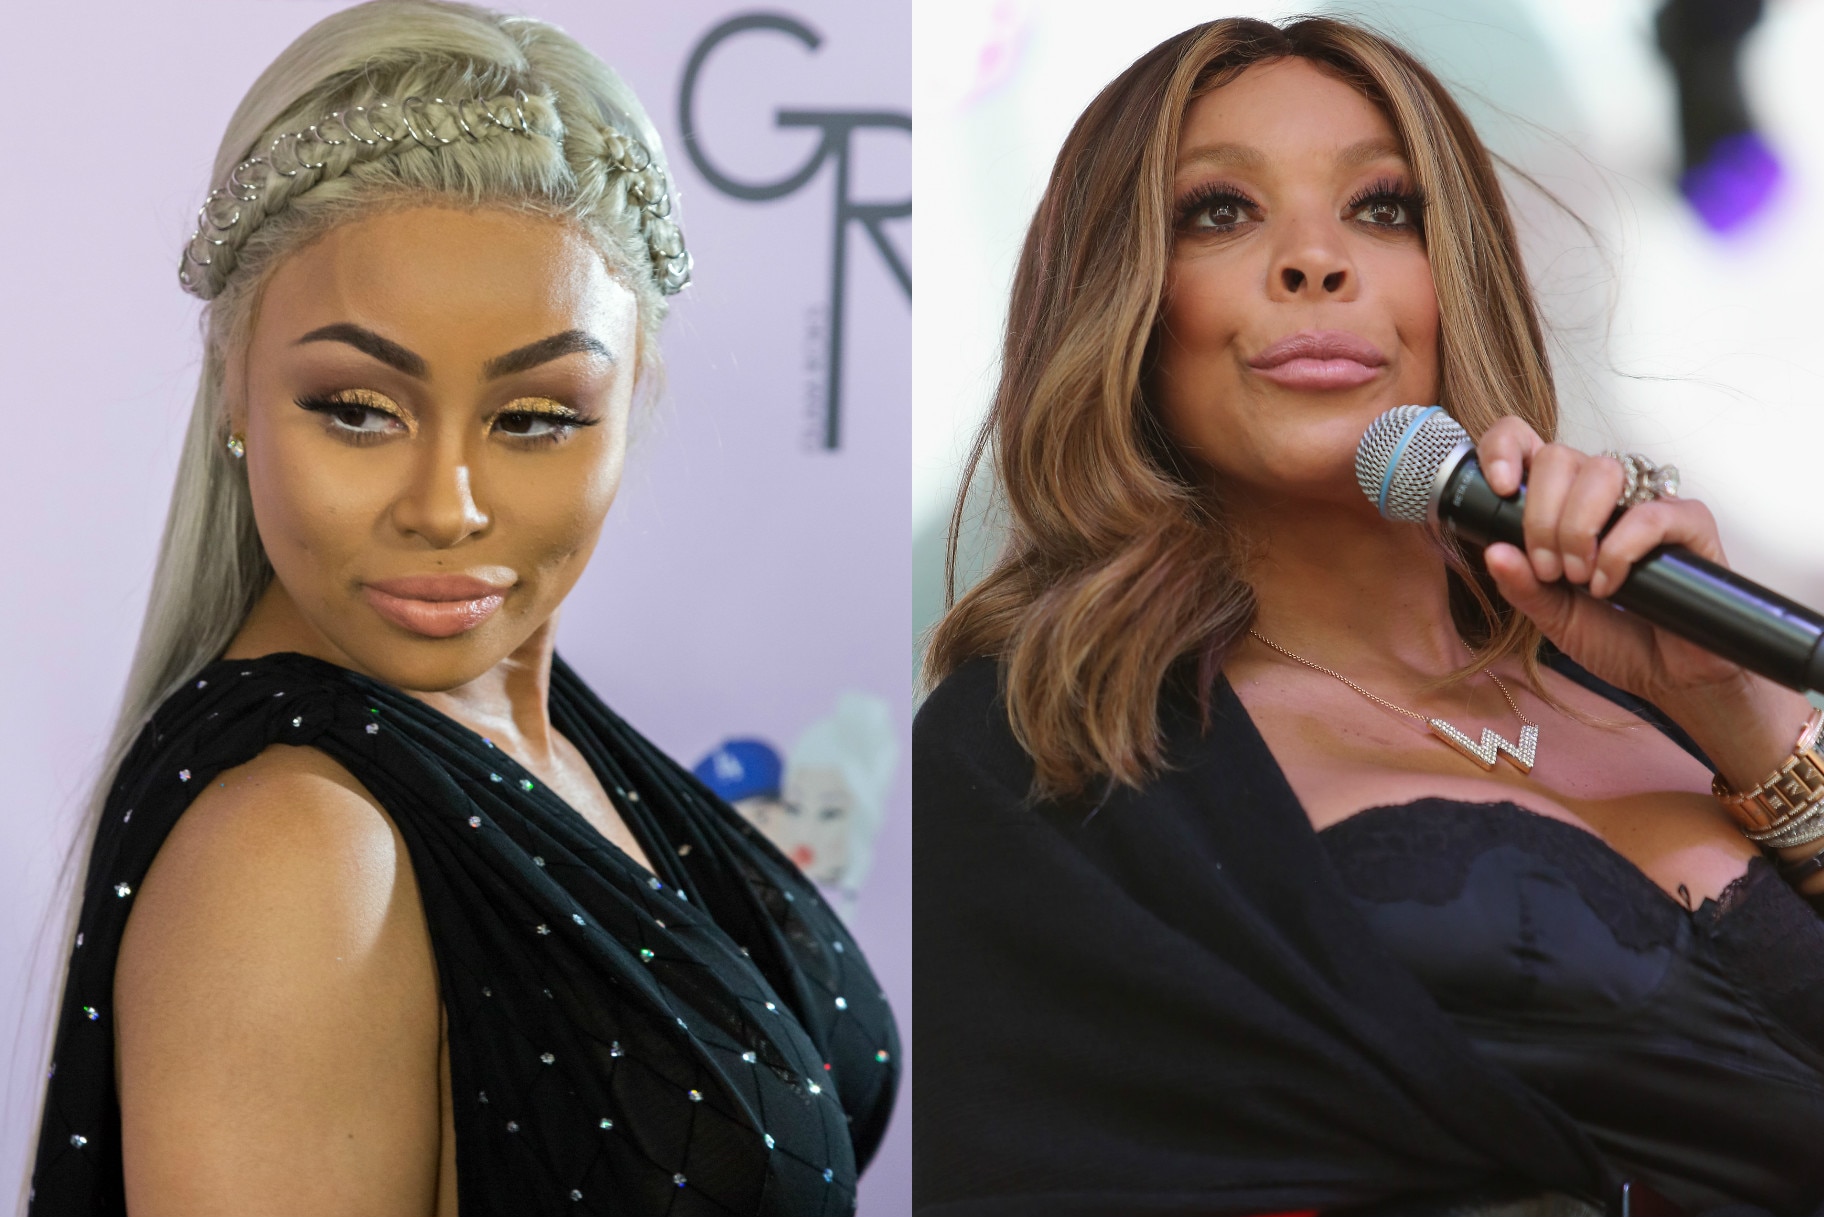 Blac Chyna Just Came For Wendy Williams' Entire Life In An Epic Instagram Rant | Very Real1824 x 1217